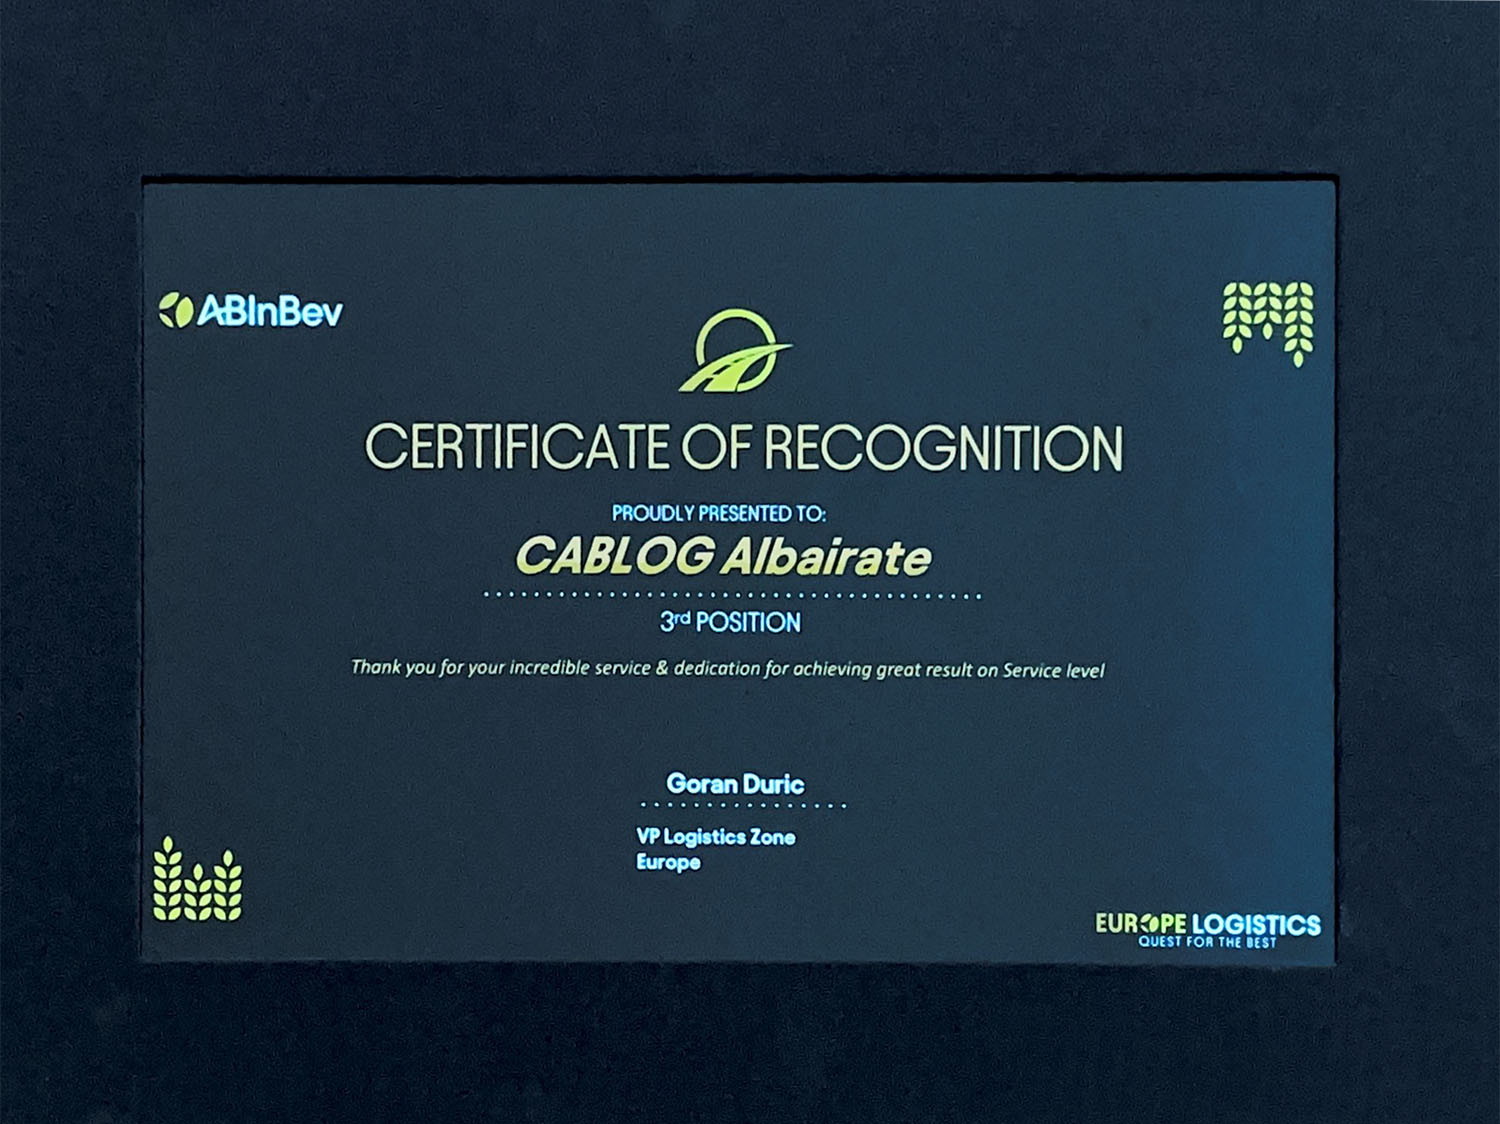 Certificate of Recognition Cab Log